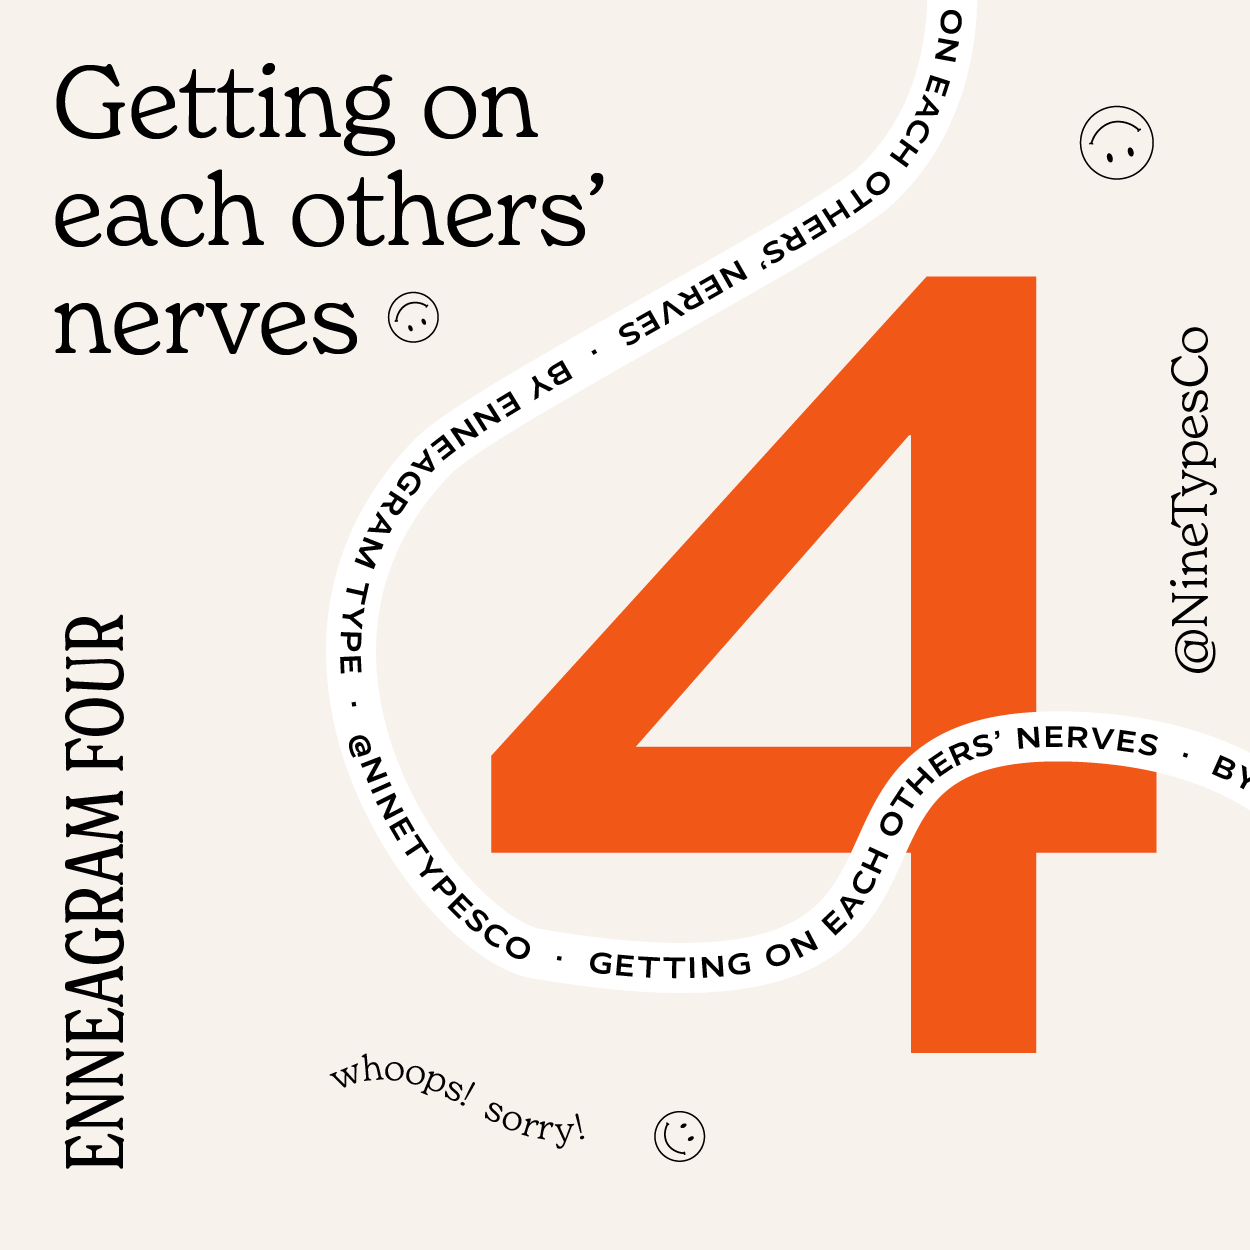 Getting on each others’ nerves by Enneagram TypeEnneagram 4@0.5x.png